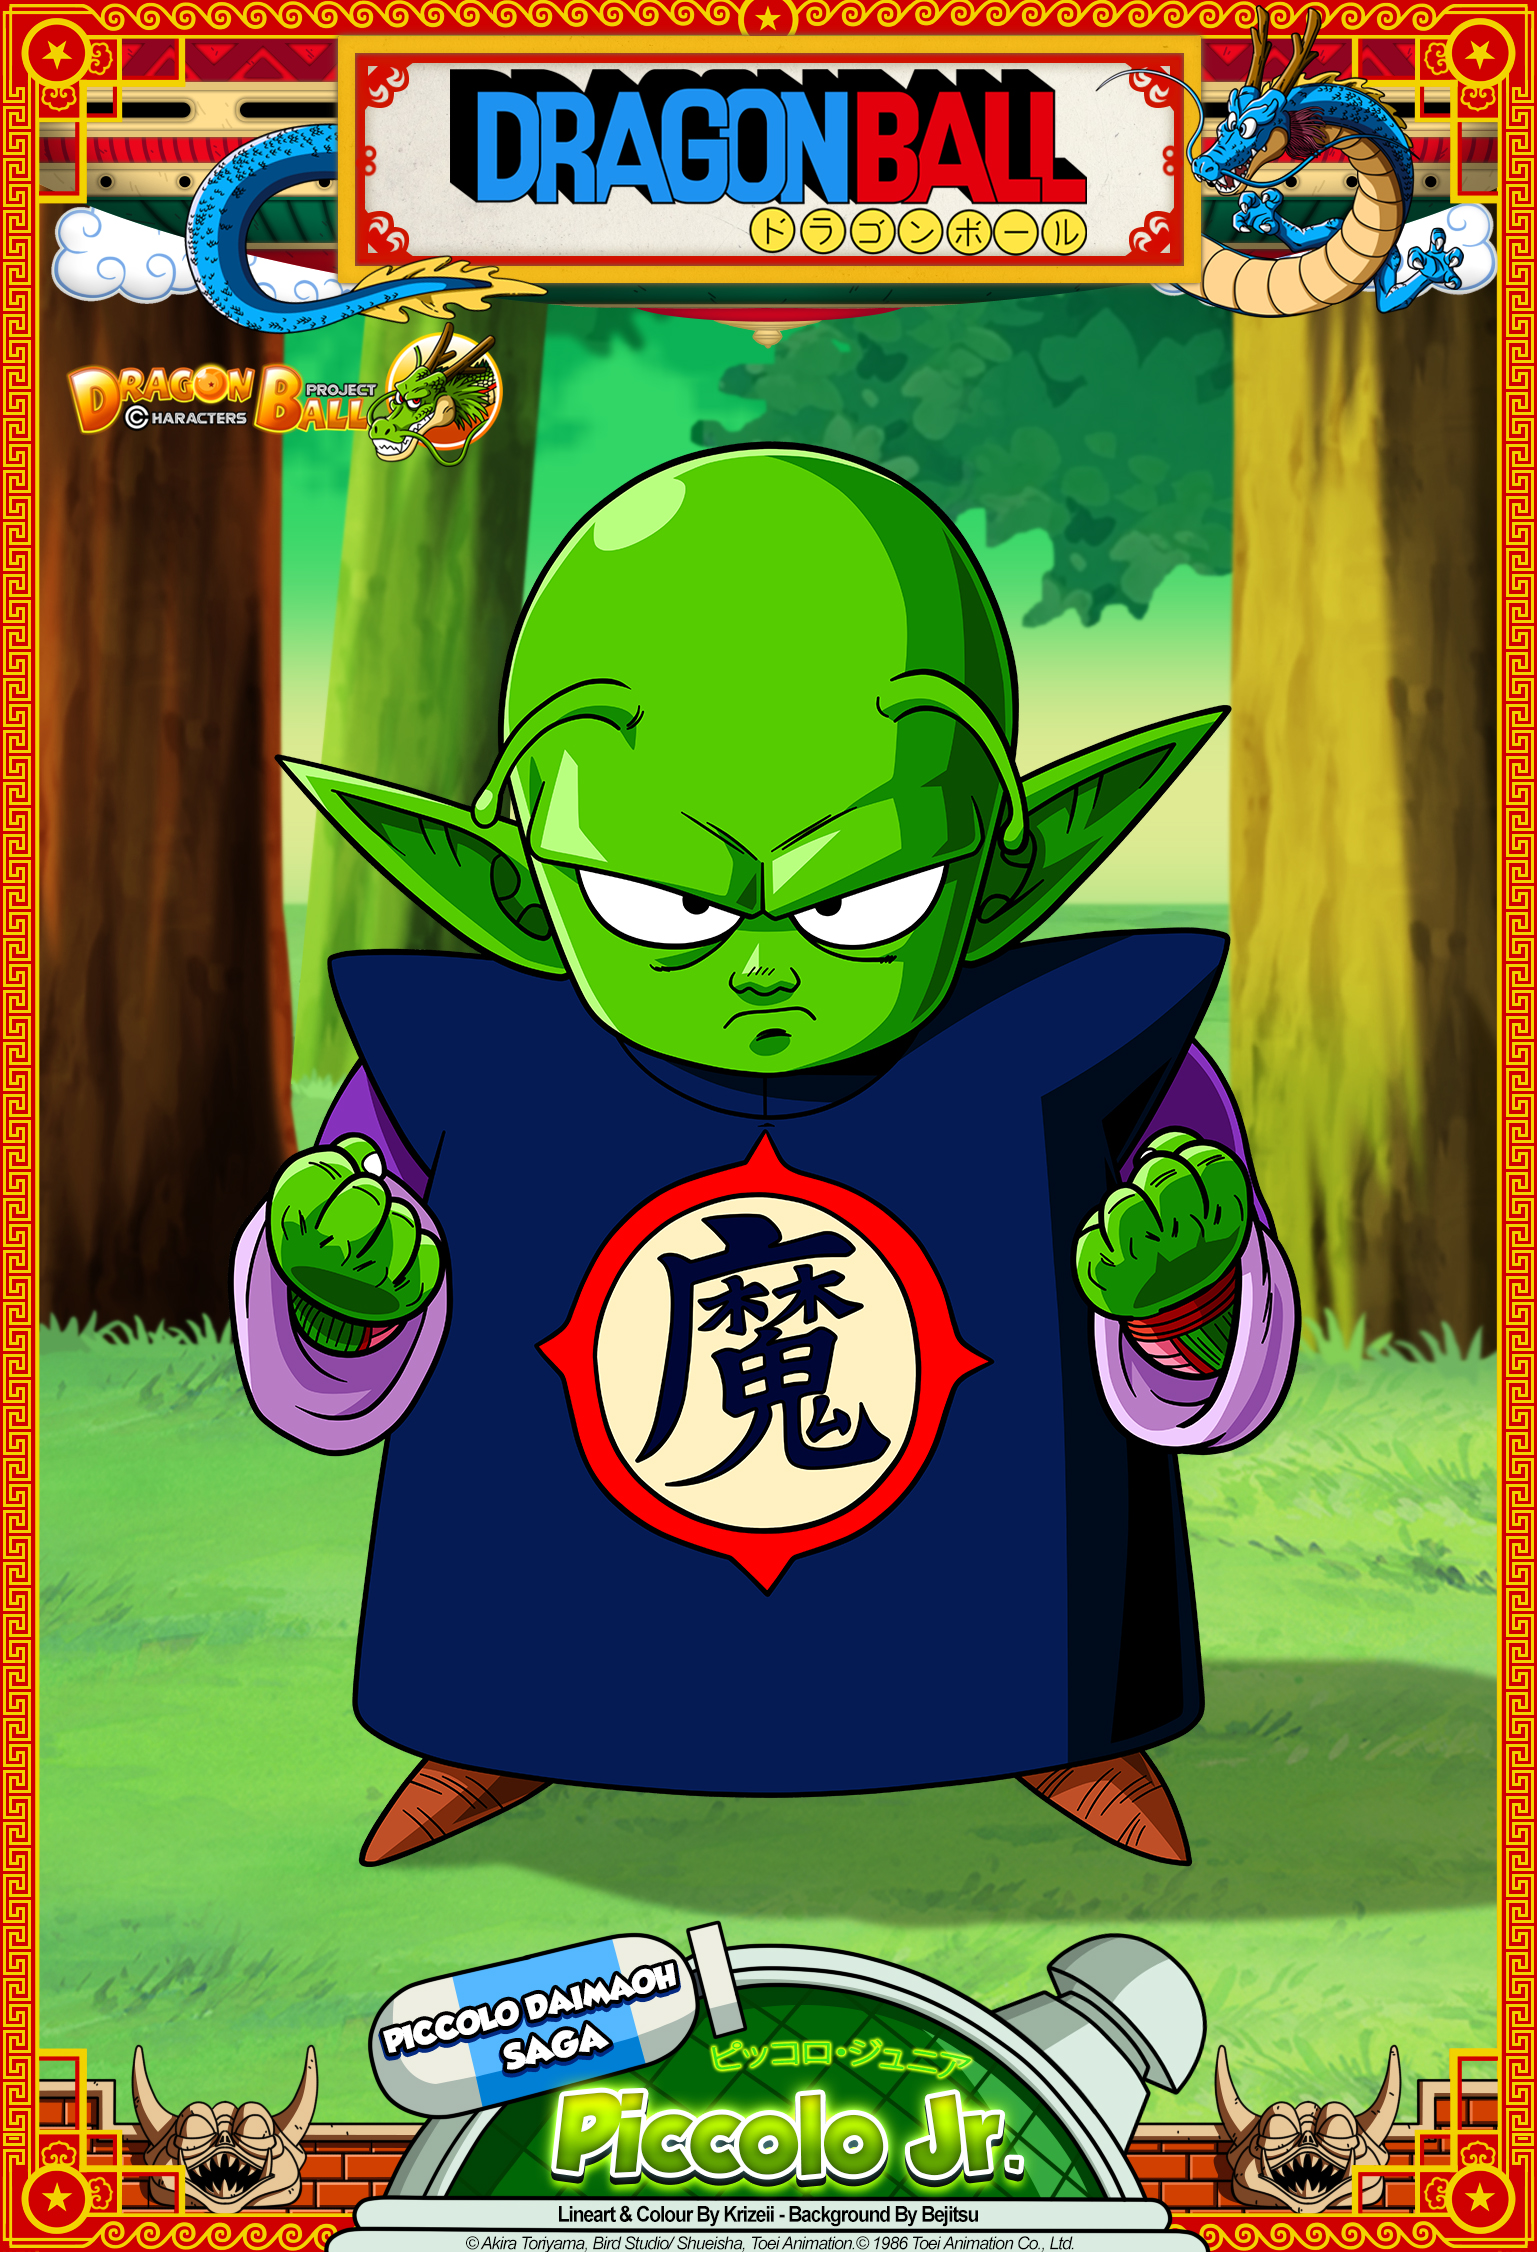 Dragon Ball - Piccolo Jr. by DBCProject on DeviantArt